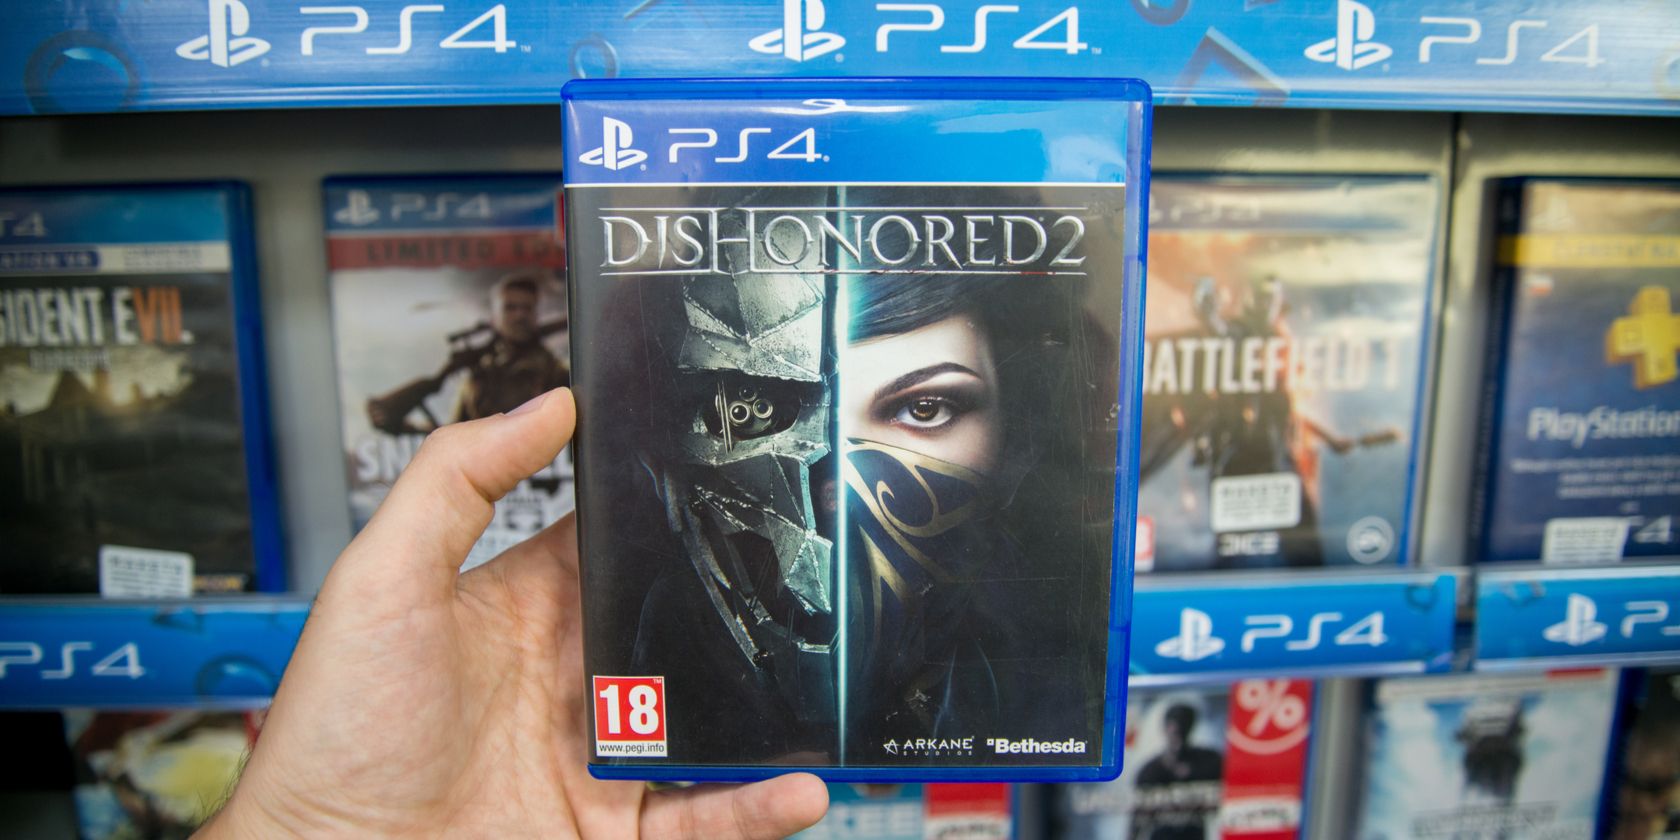 Hand holding Dishonored 2 PS4 game case in a store